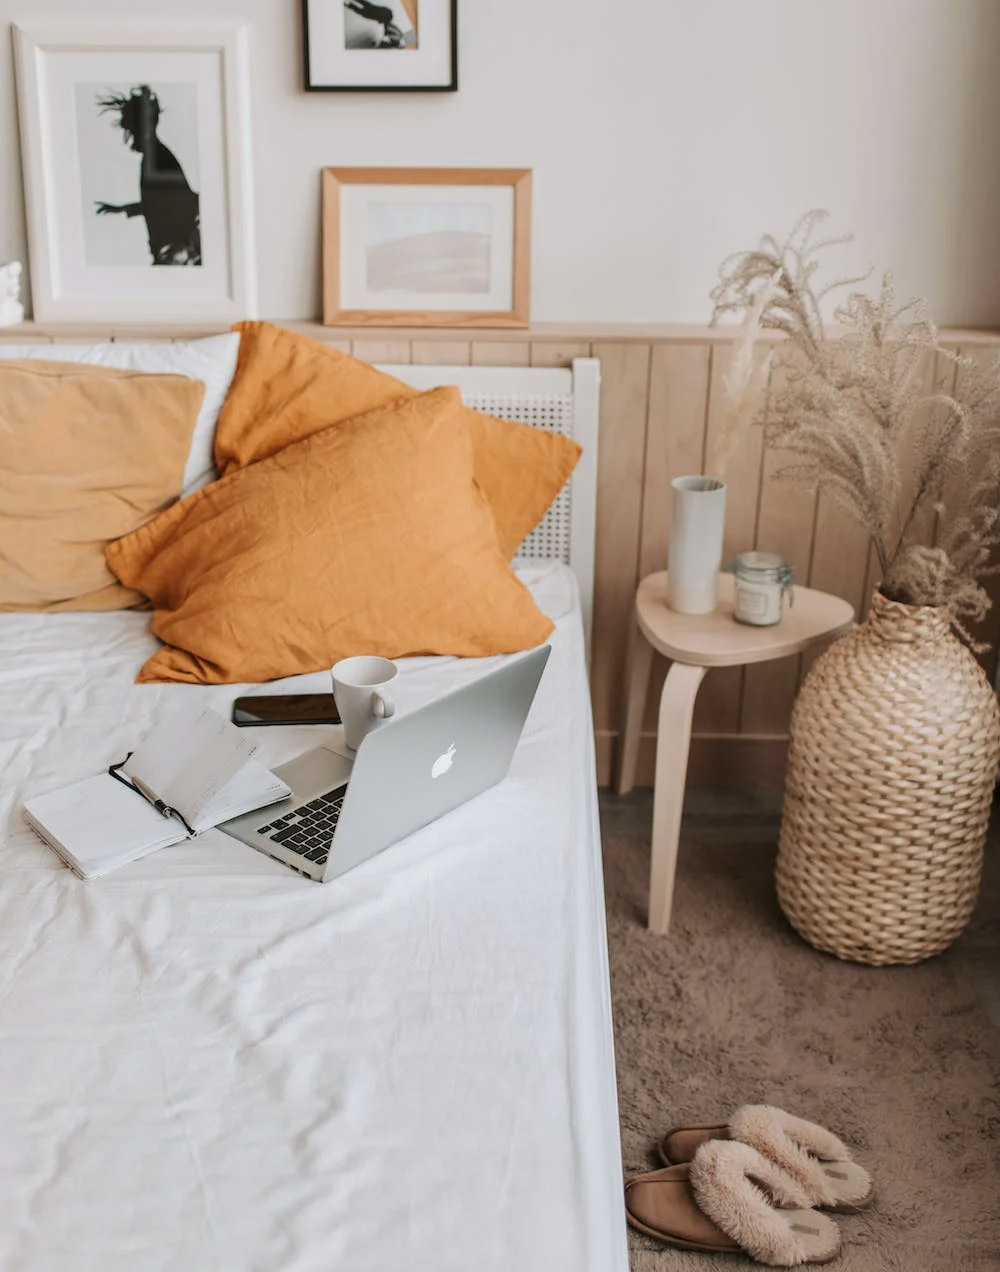 Bed with laptop and pillows